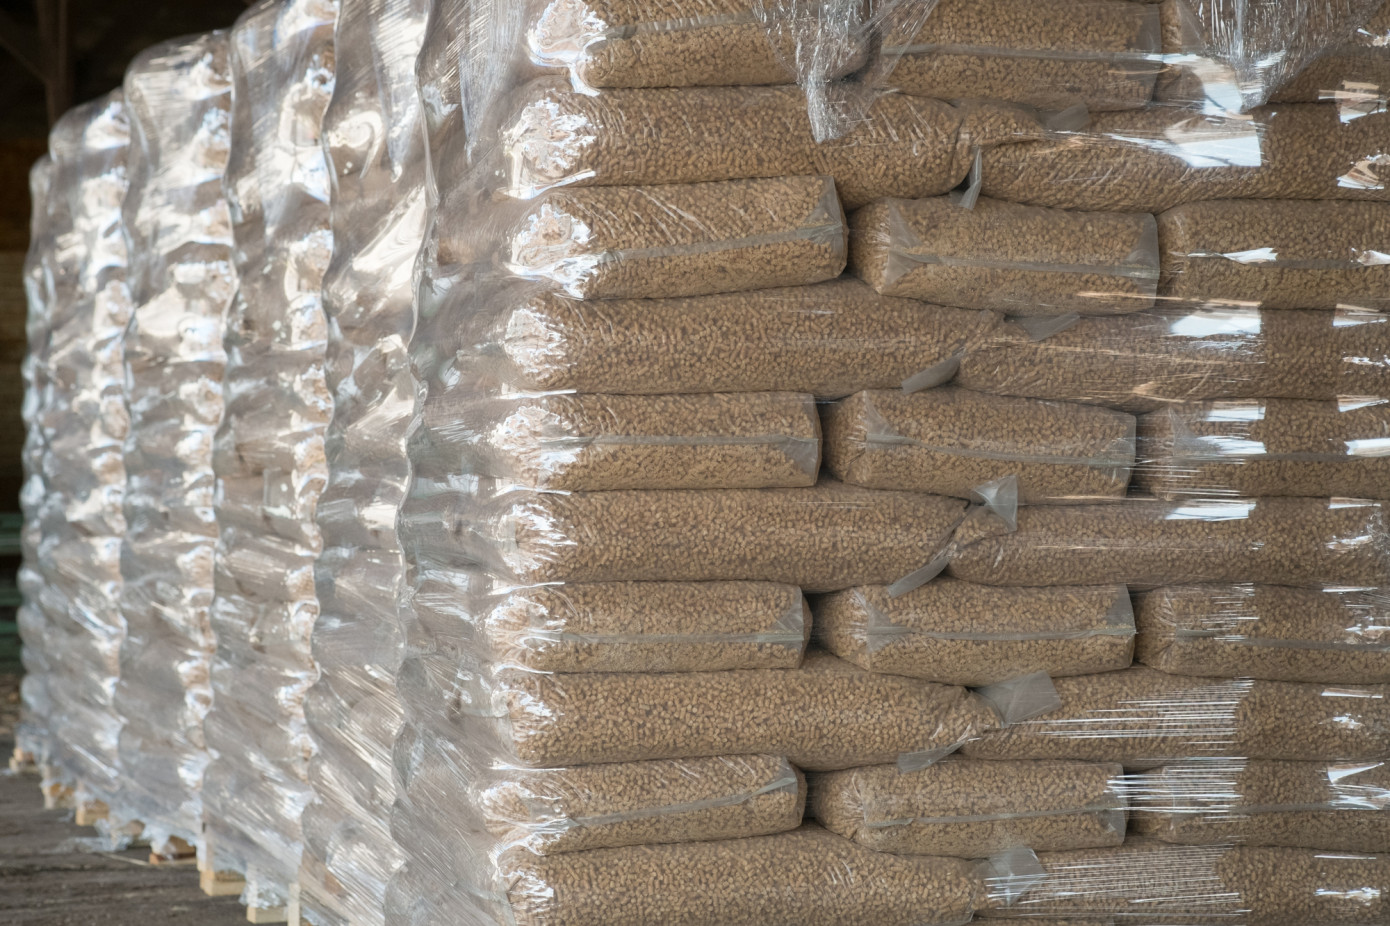 In September, price for wood pellets imported to UK loses 10%